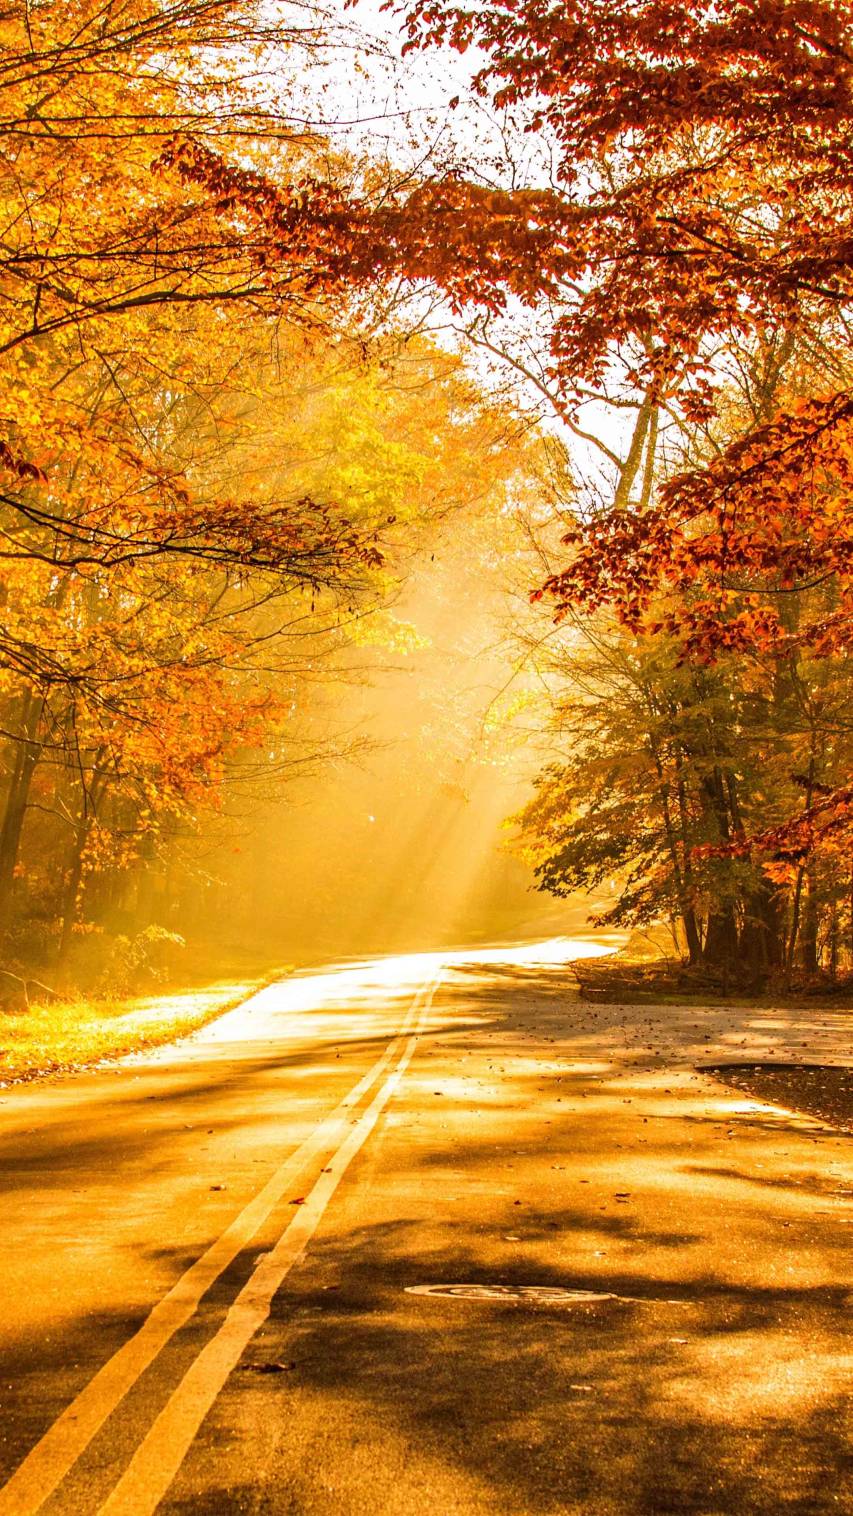 Road, foliage, 4k hd Autumn Phone Wallpapers